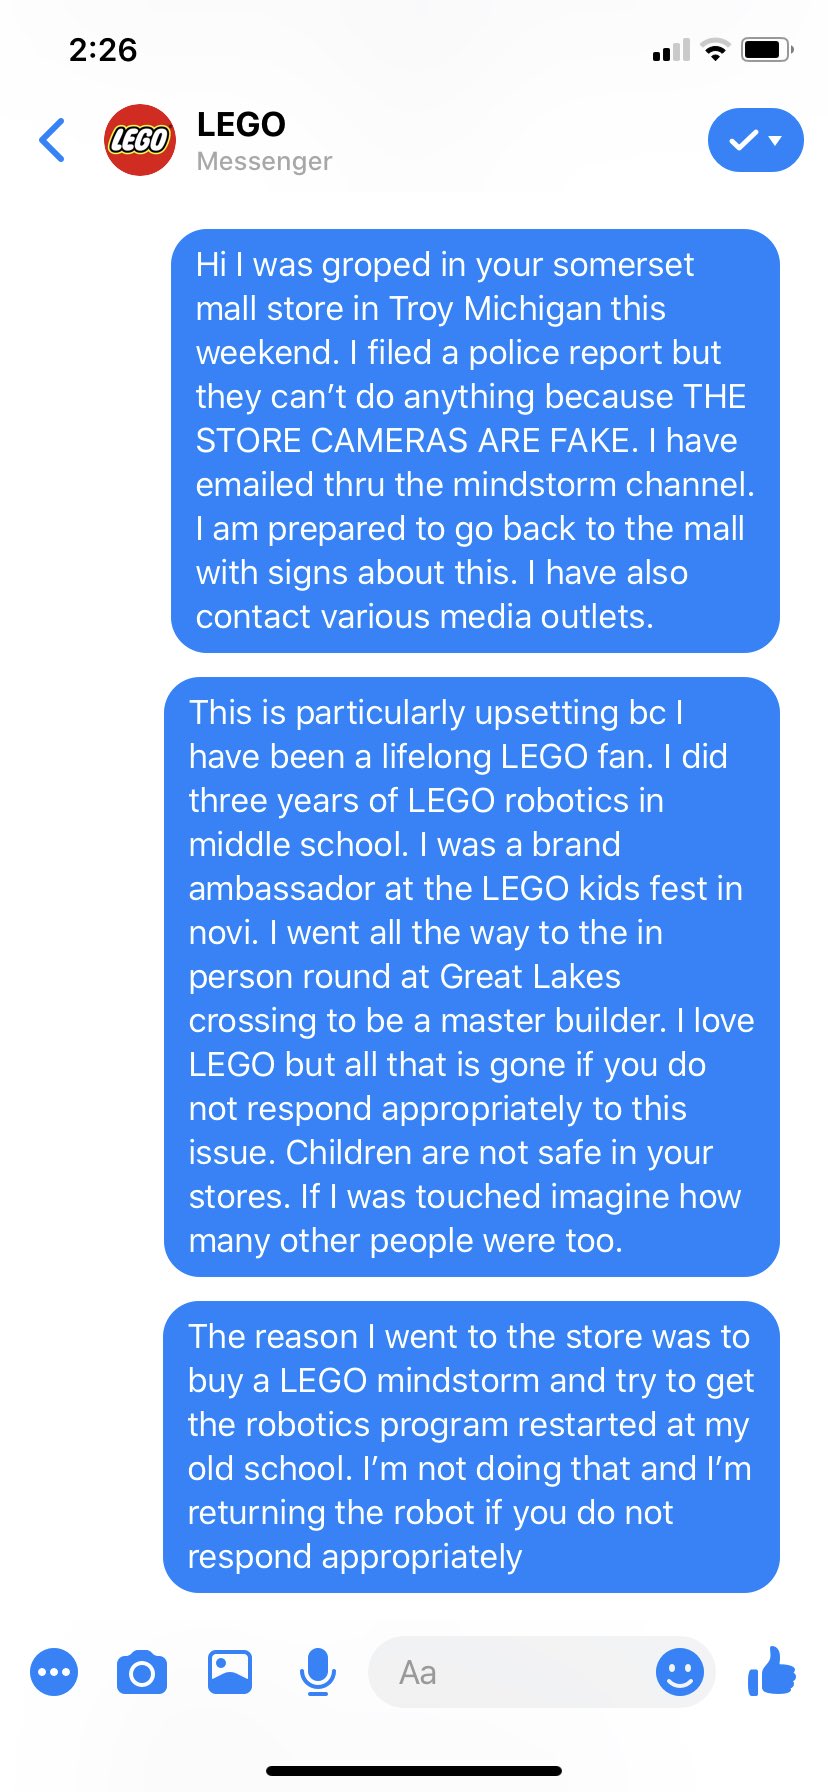 Emily Panone on X: LEGO I need you to take action. Your store at